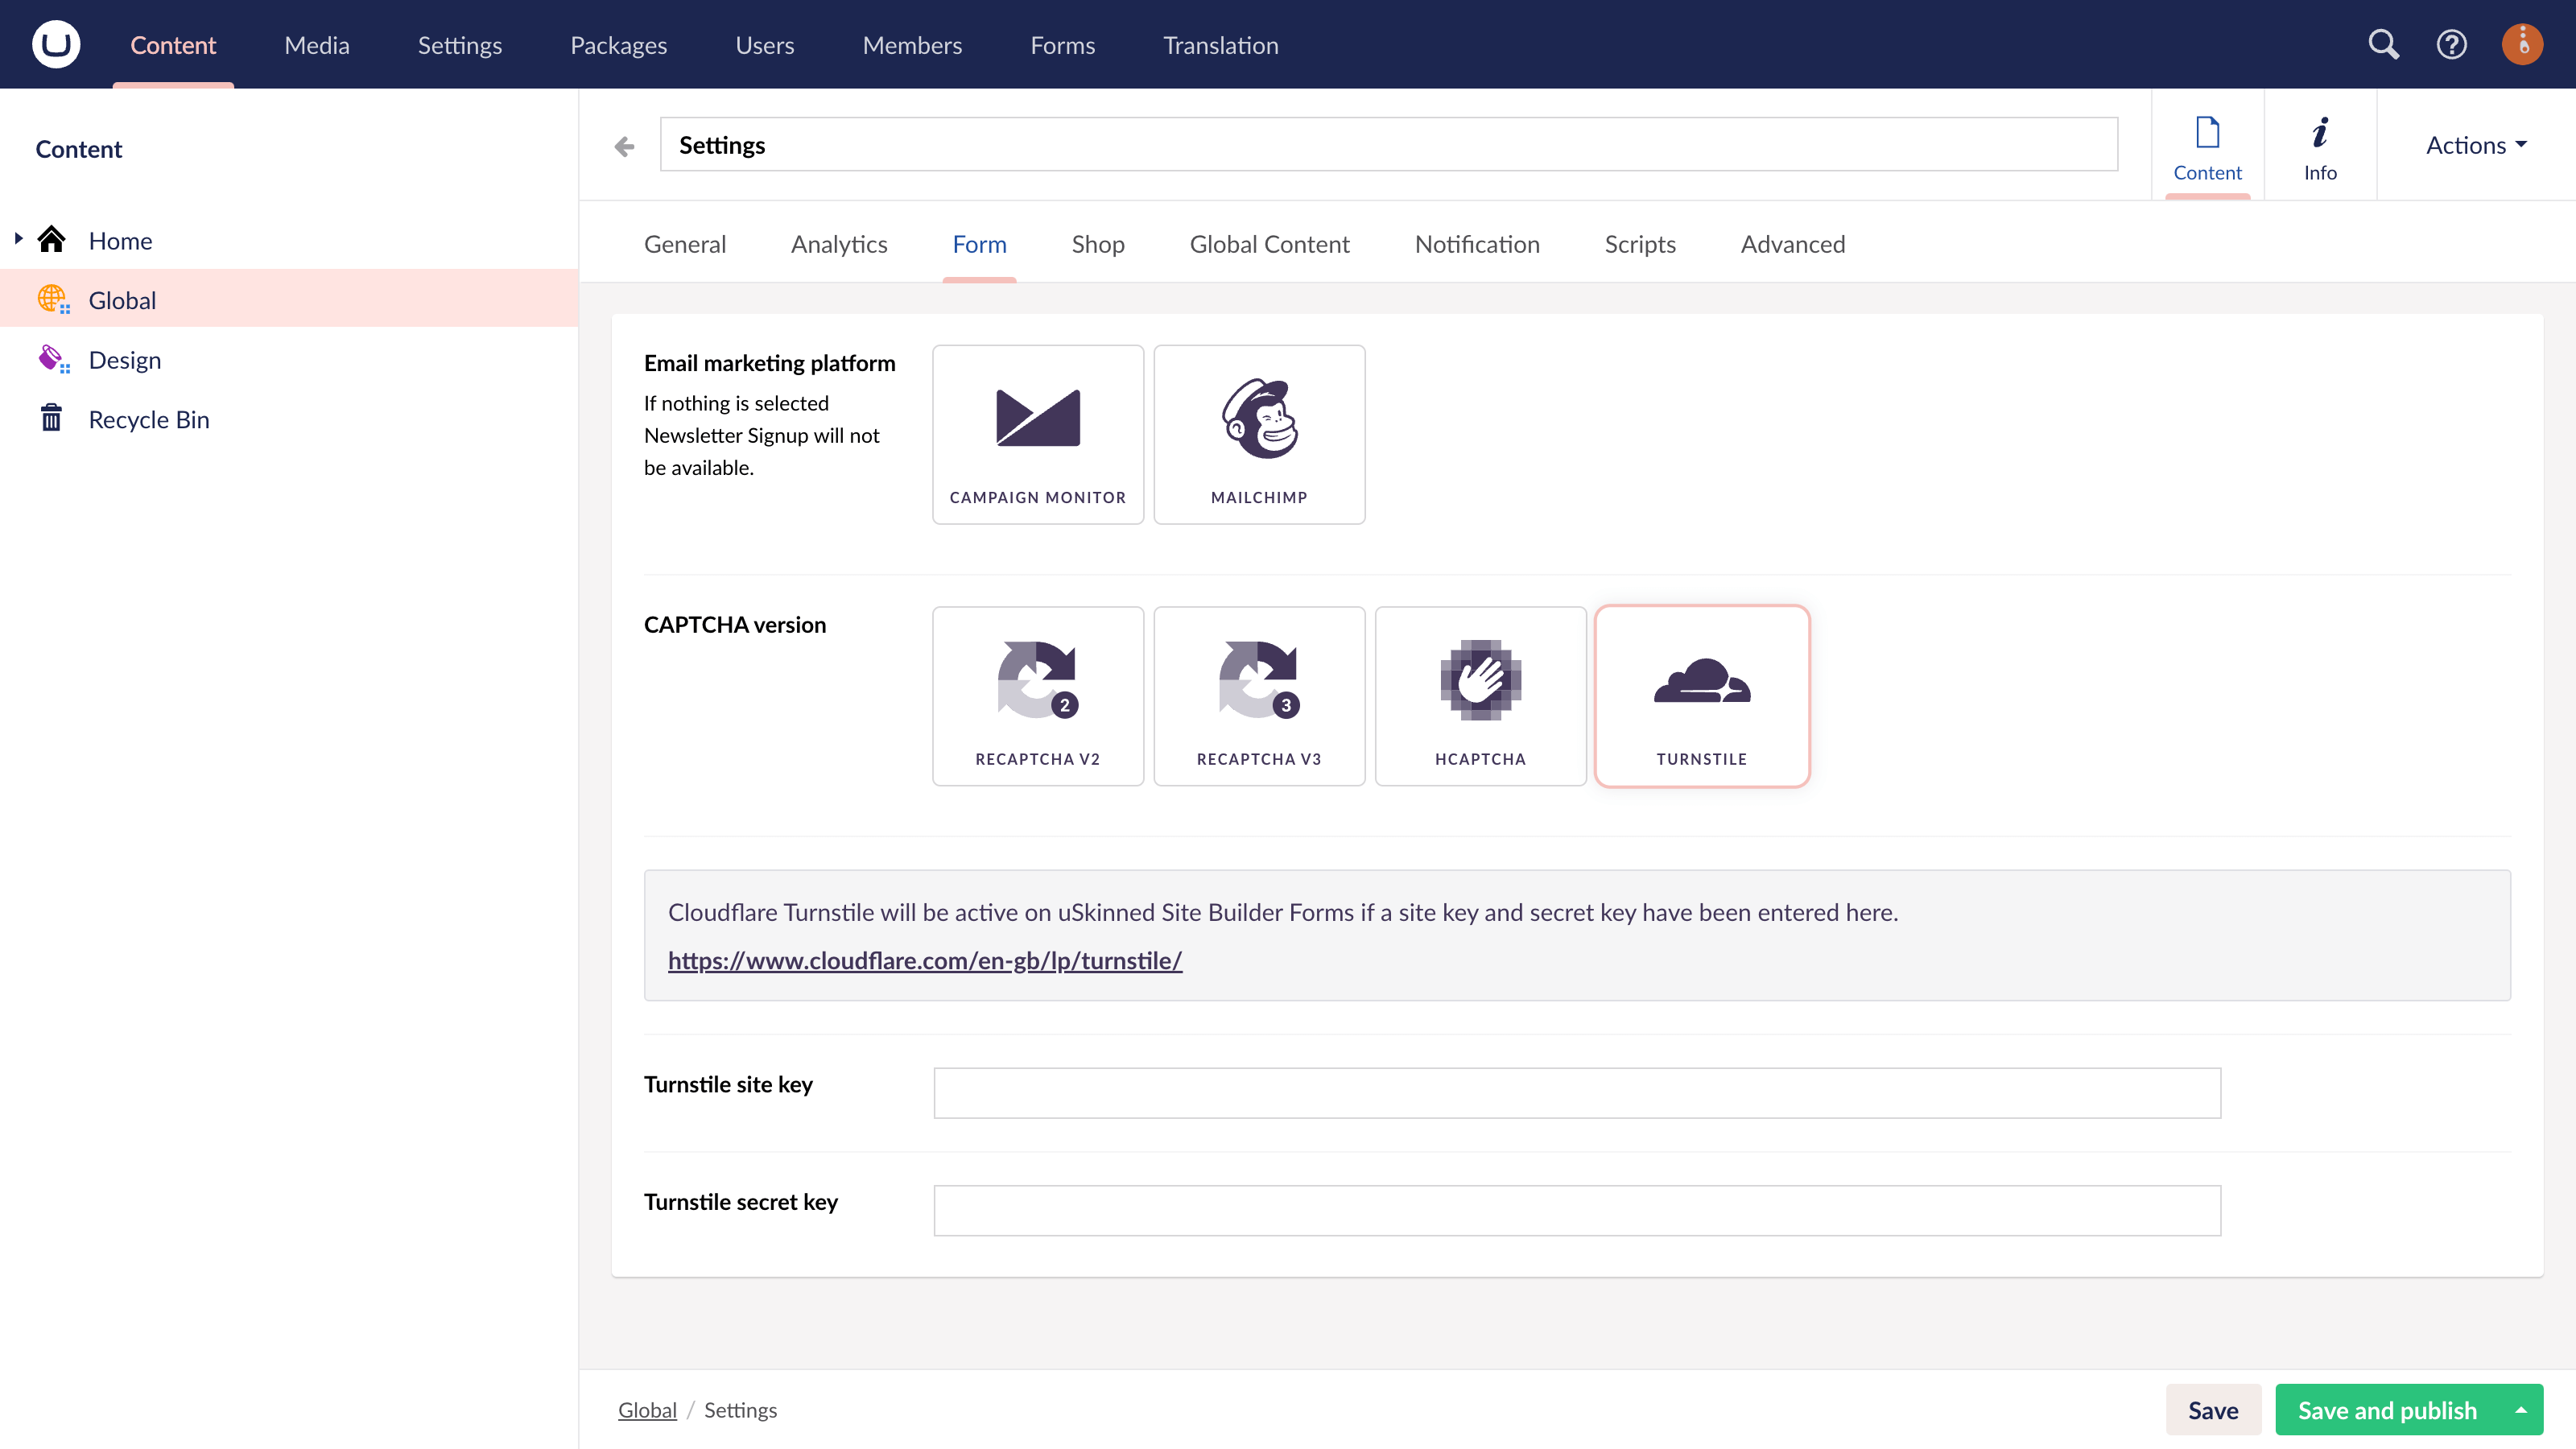 Cloudflare's Turnstile integration with uSkinned for Umbraco.